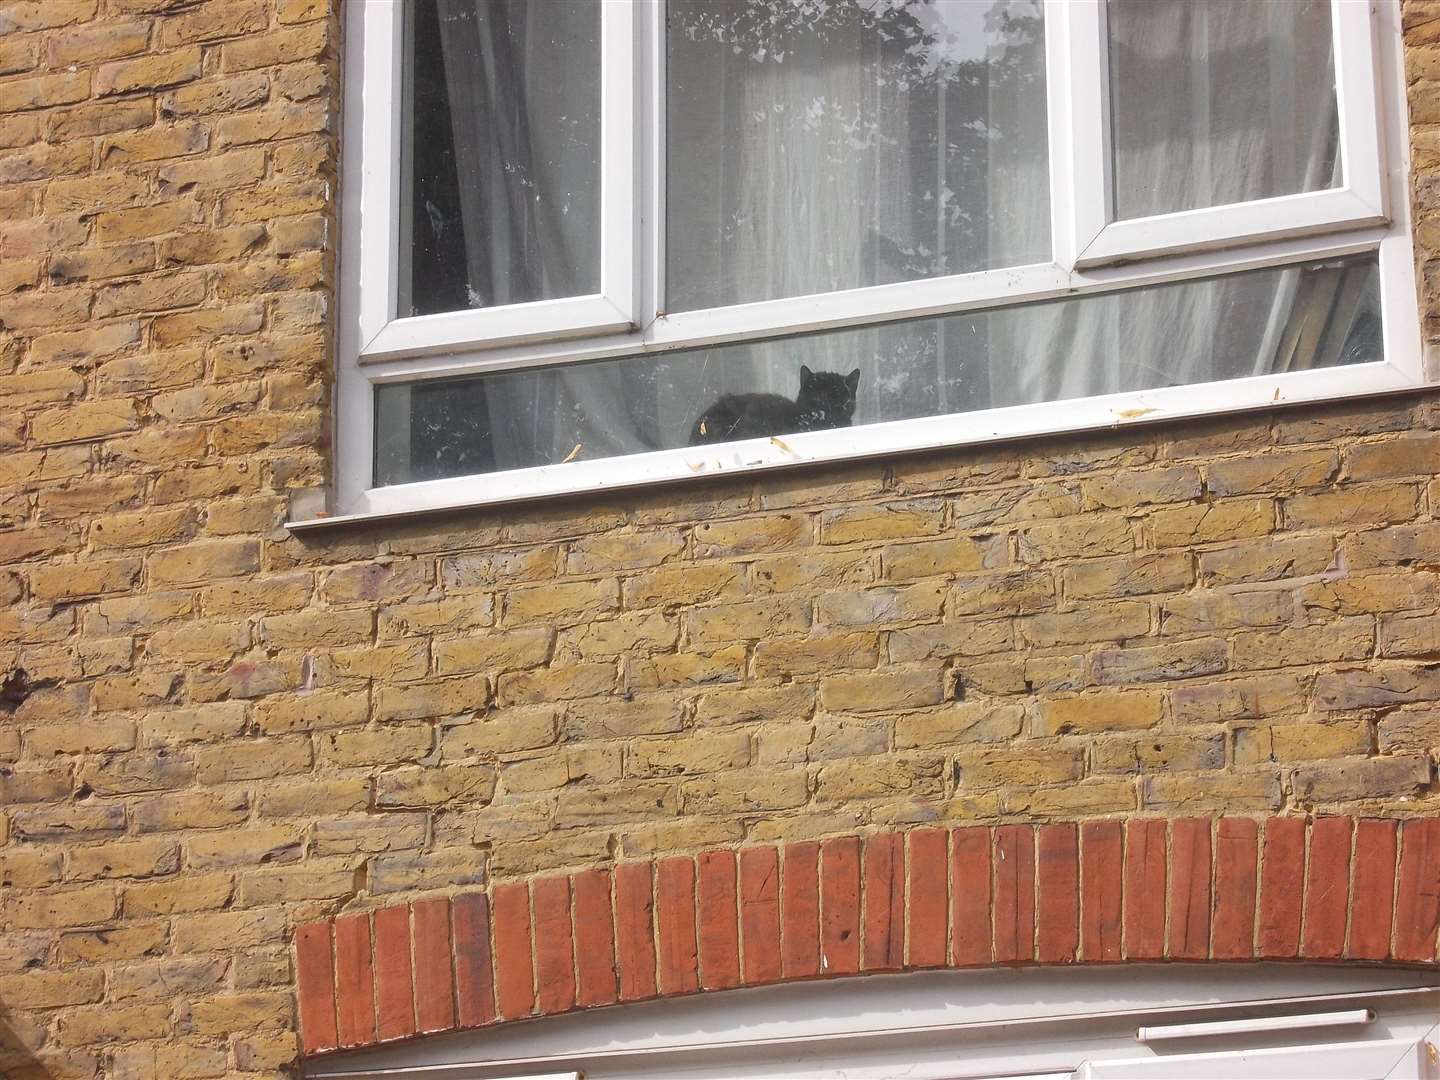 The cat has been spotted sitting on the upstairs window sill. Picture: Mick Jones